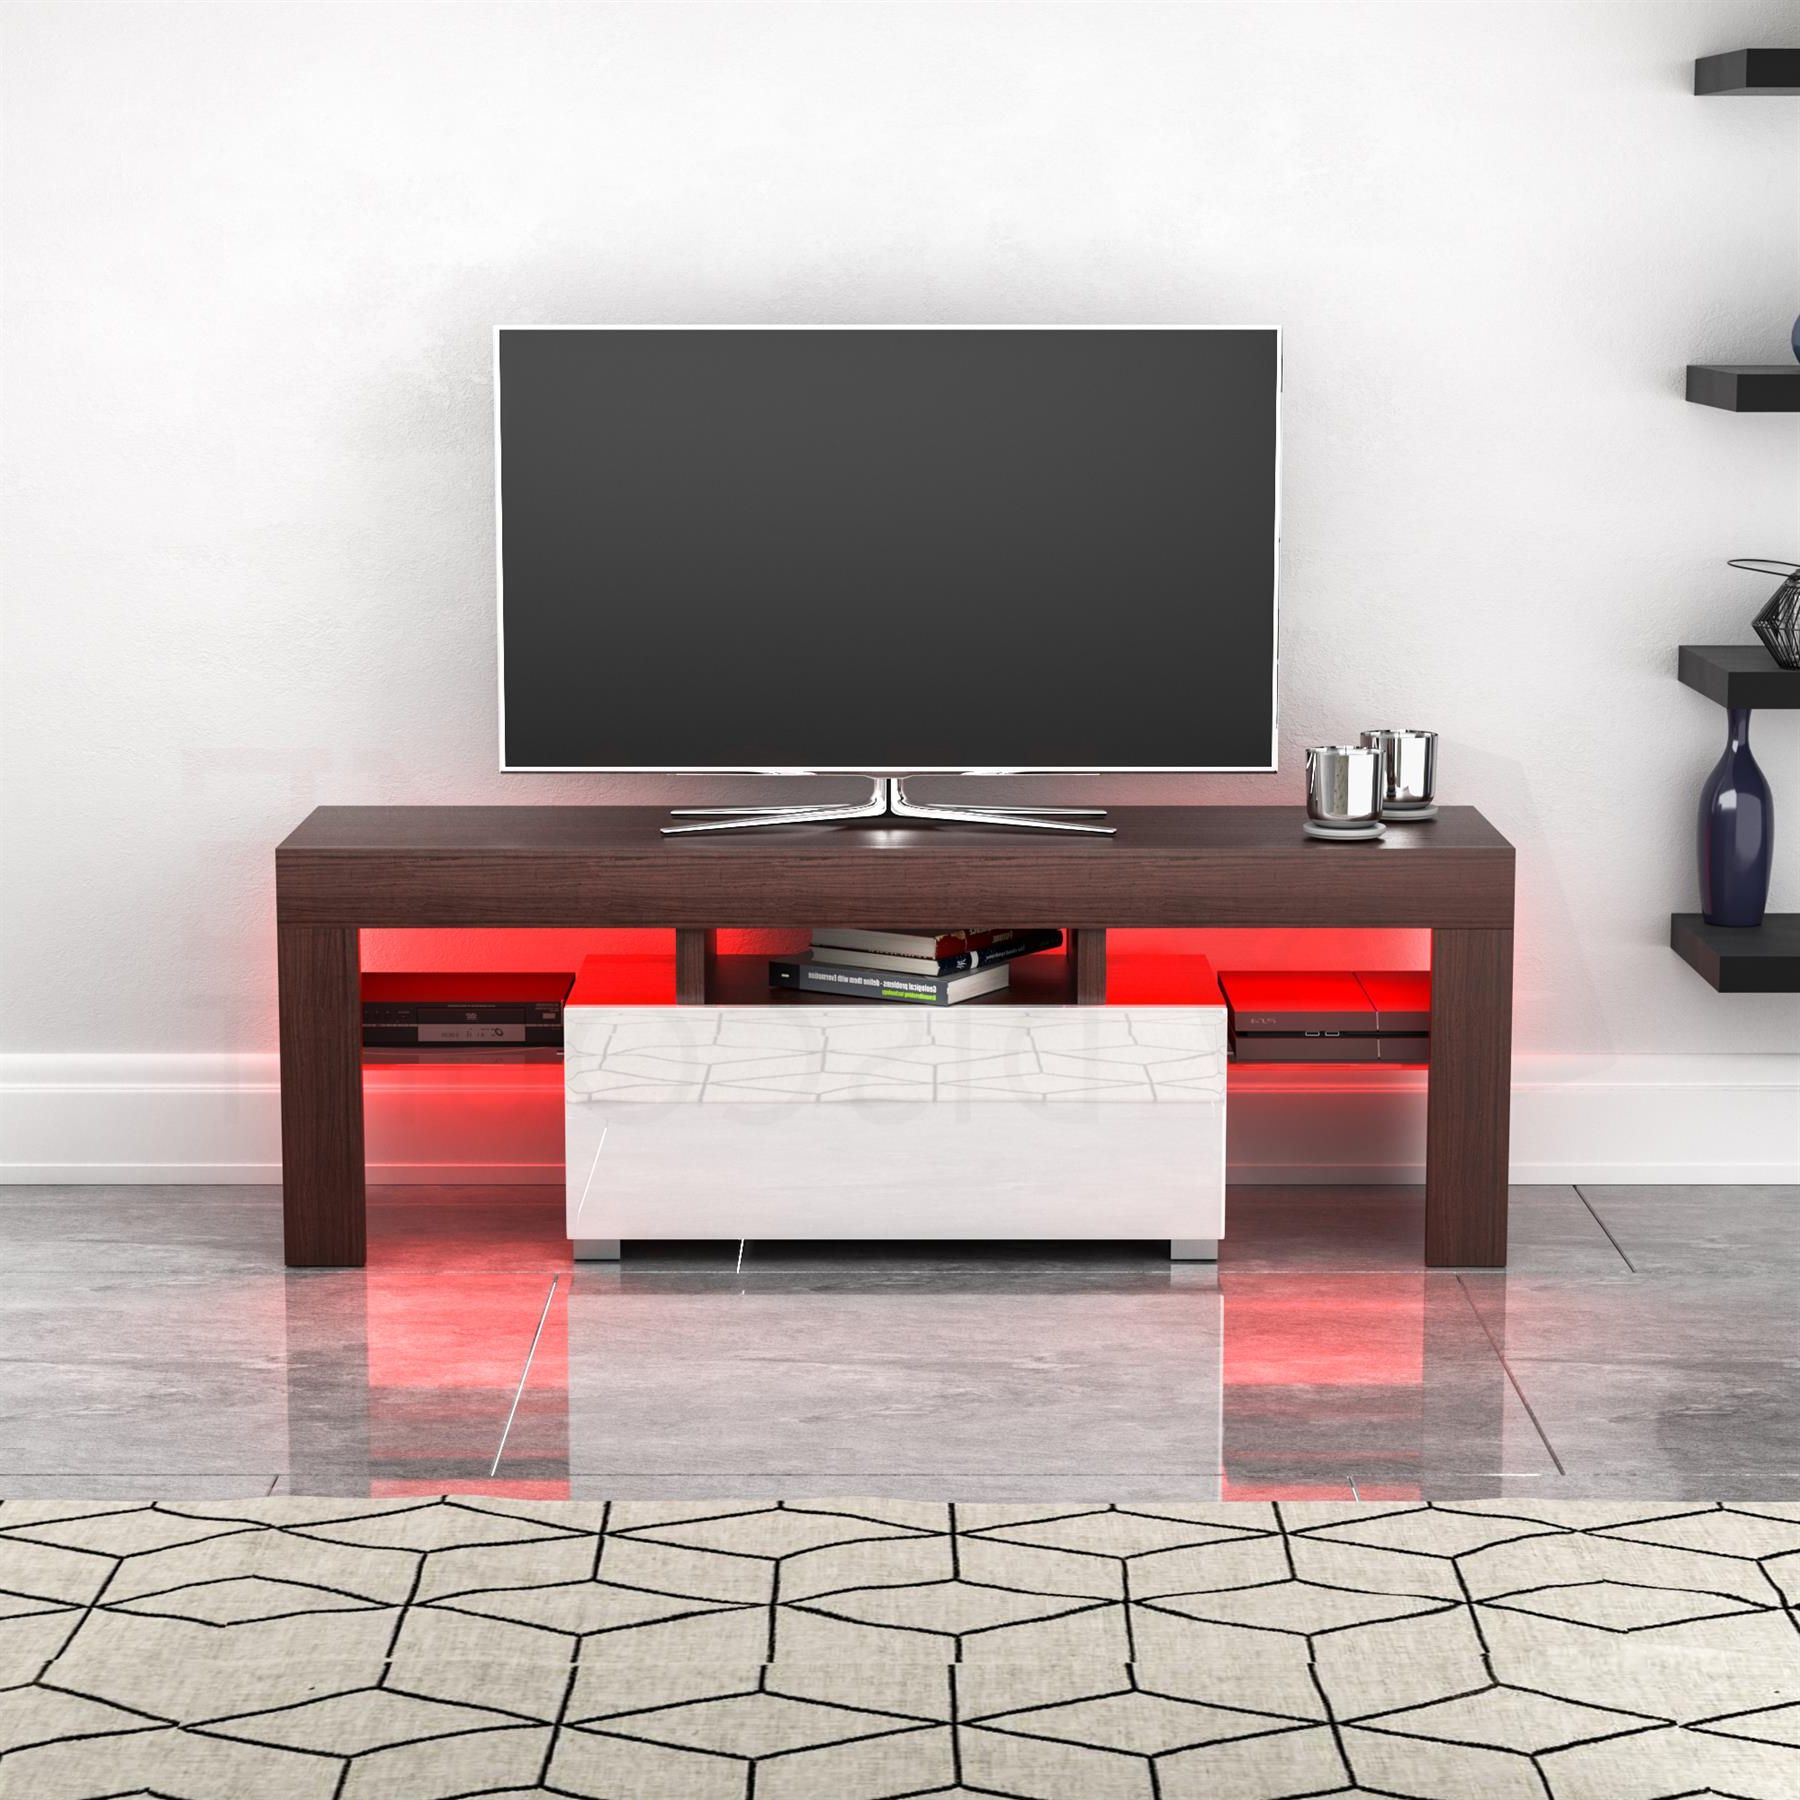 Luna Led Tv Stand Cabinet Unit 1 Drawer Modern Inside Zimtown Modern Tv Stands High Gloss Media Console Cabinet With Led Shelf And Drawers (View 2 of 20)